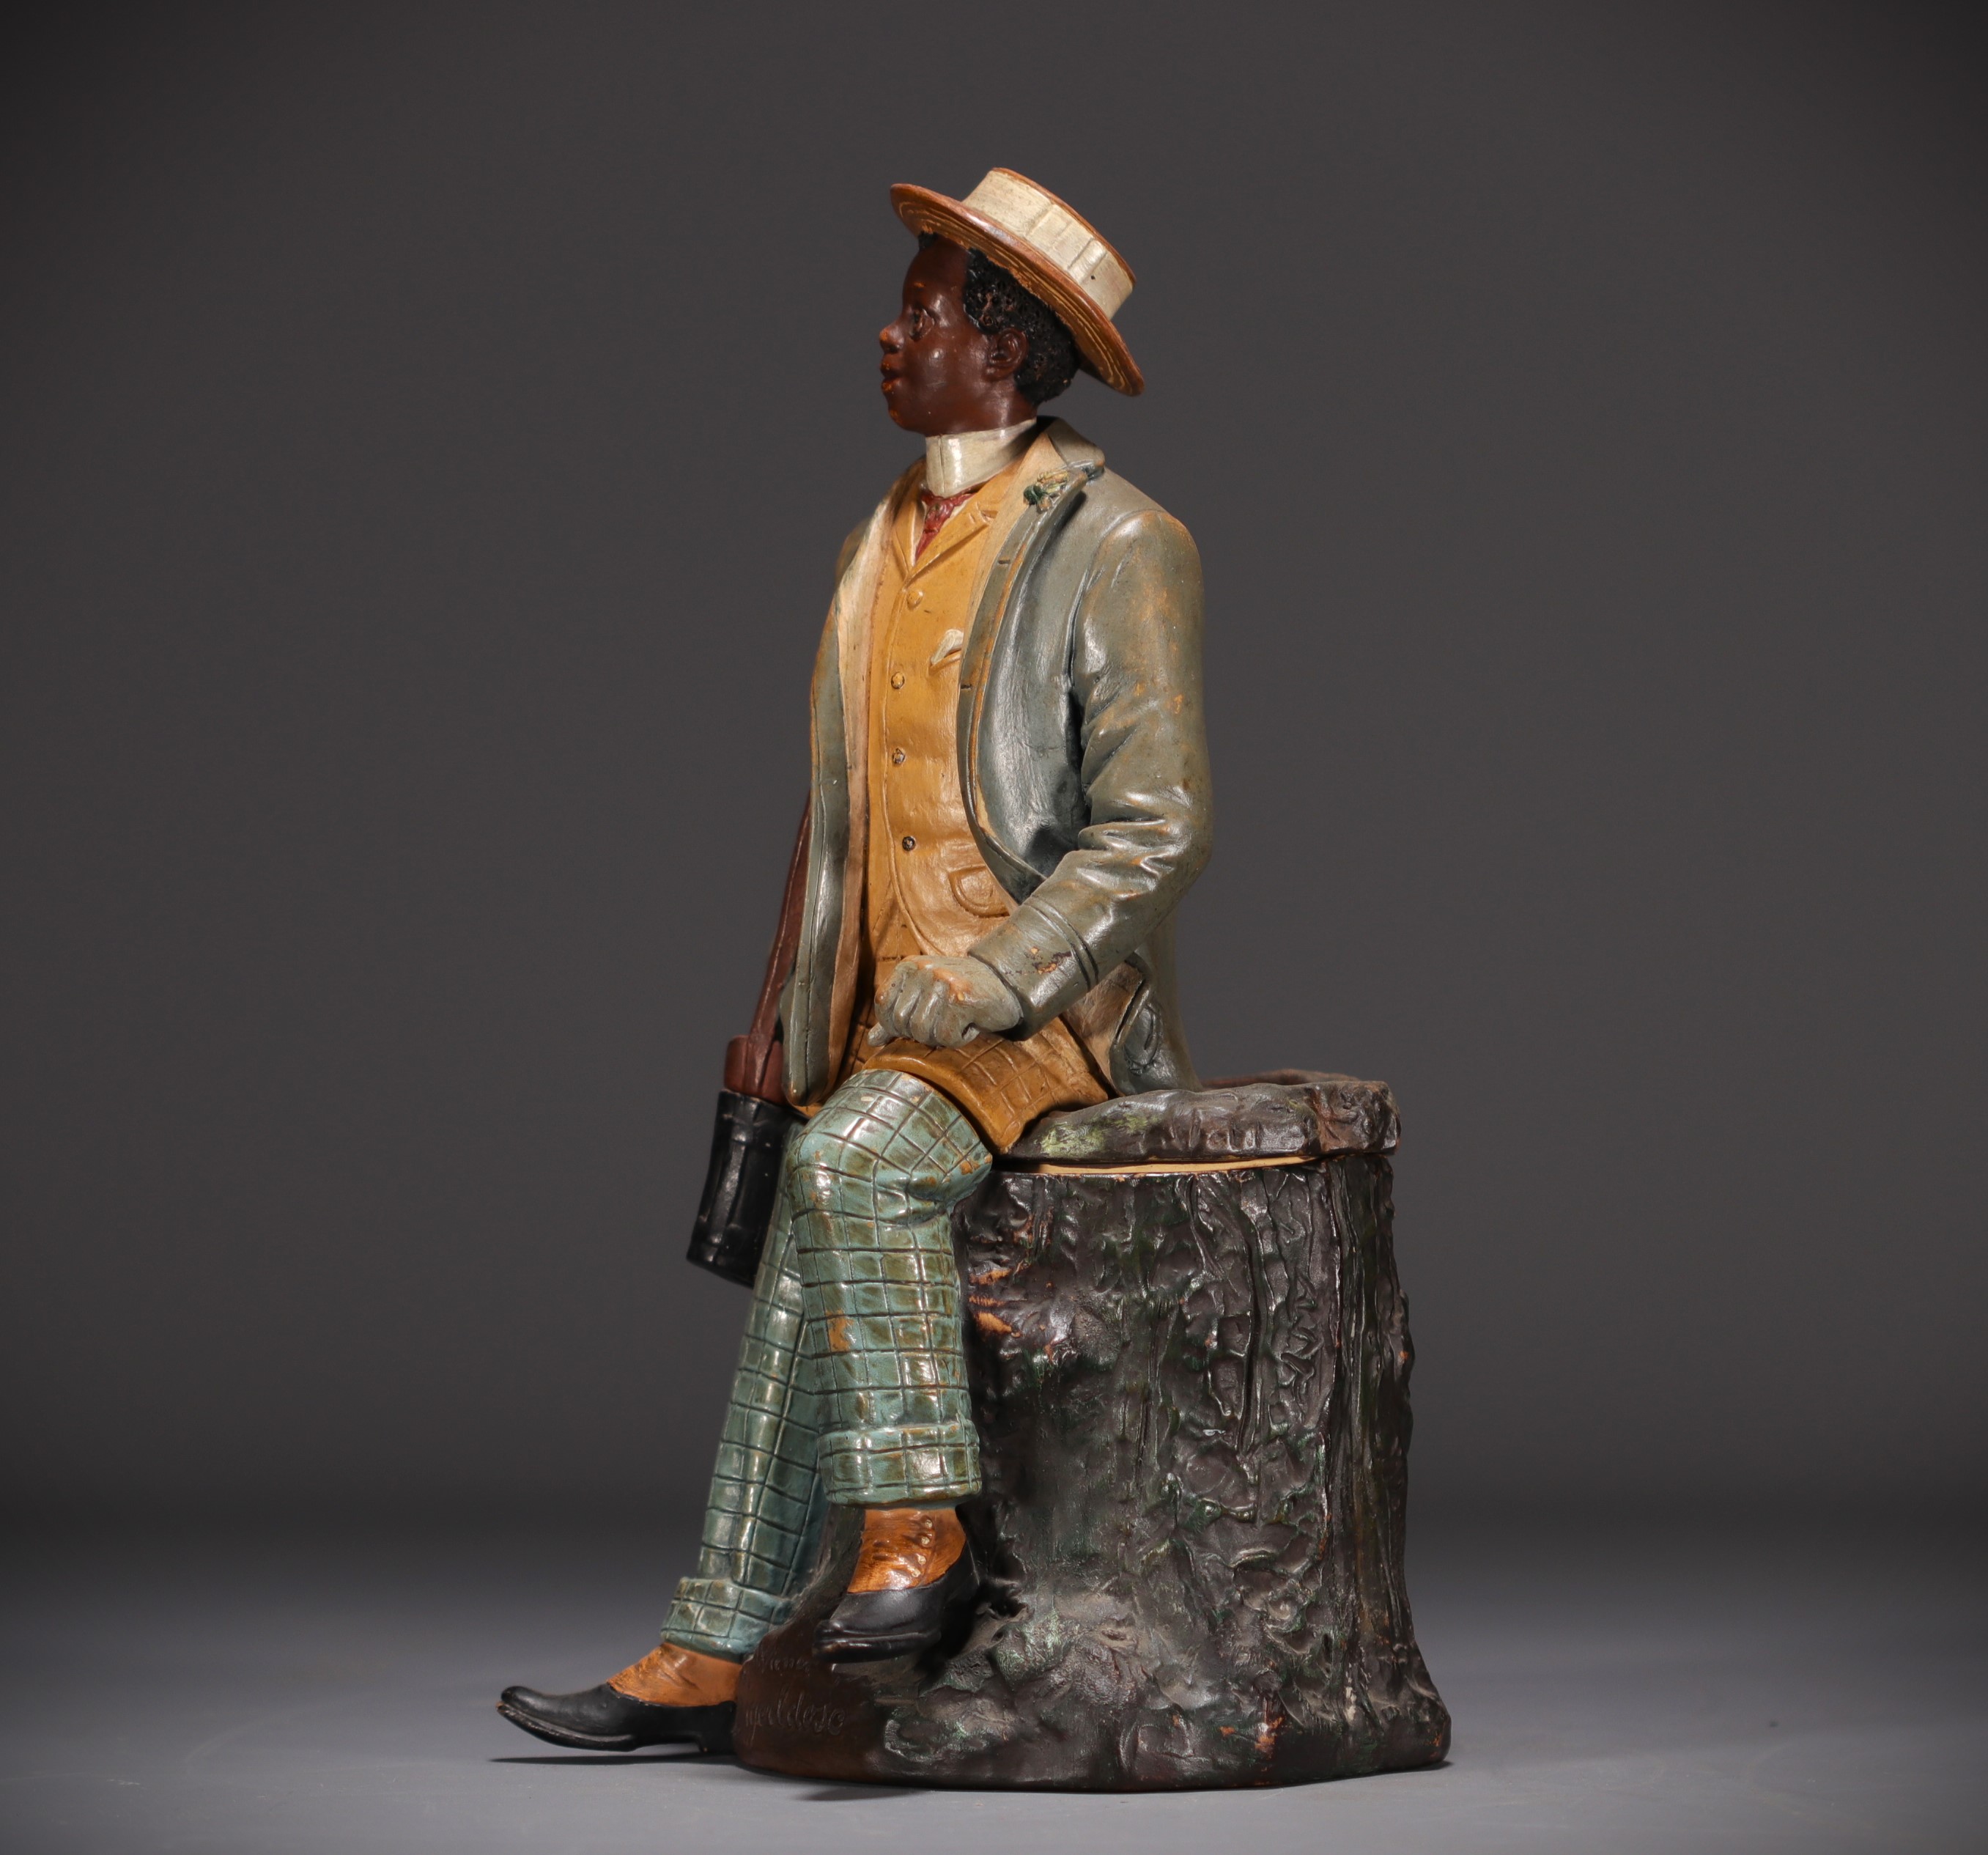 Bernard BLOCH (1836-1909) "African dandy with monocle" Polychrome terracotta tobacco pot. - Image 3 of 5